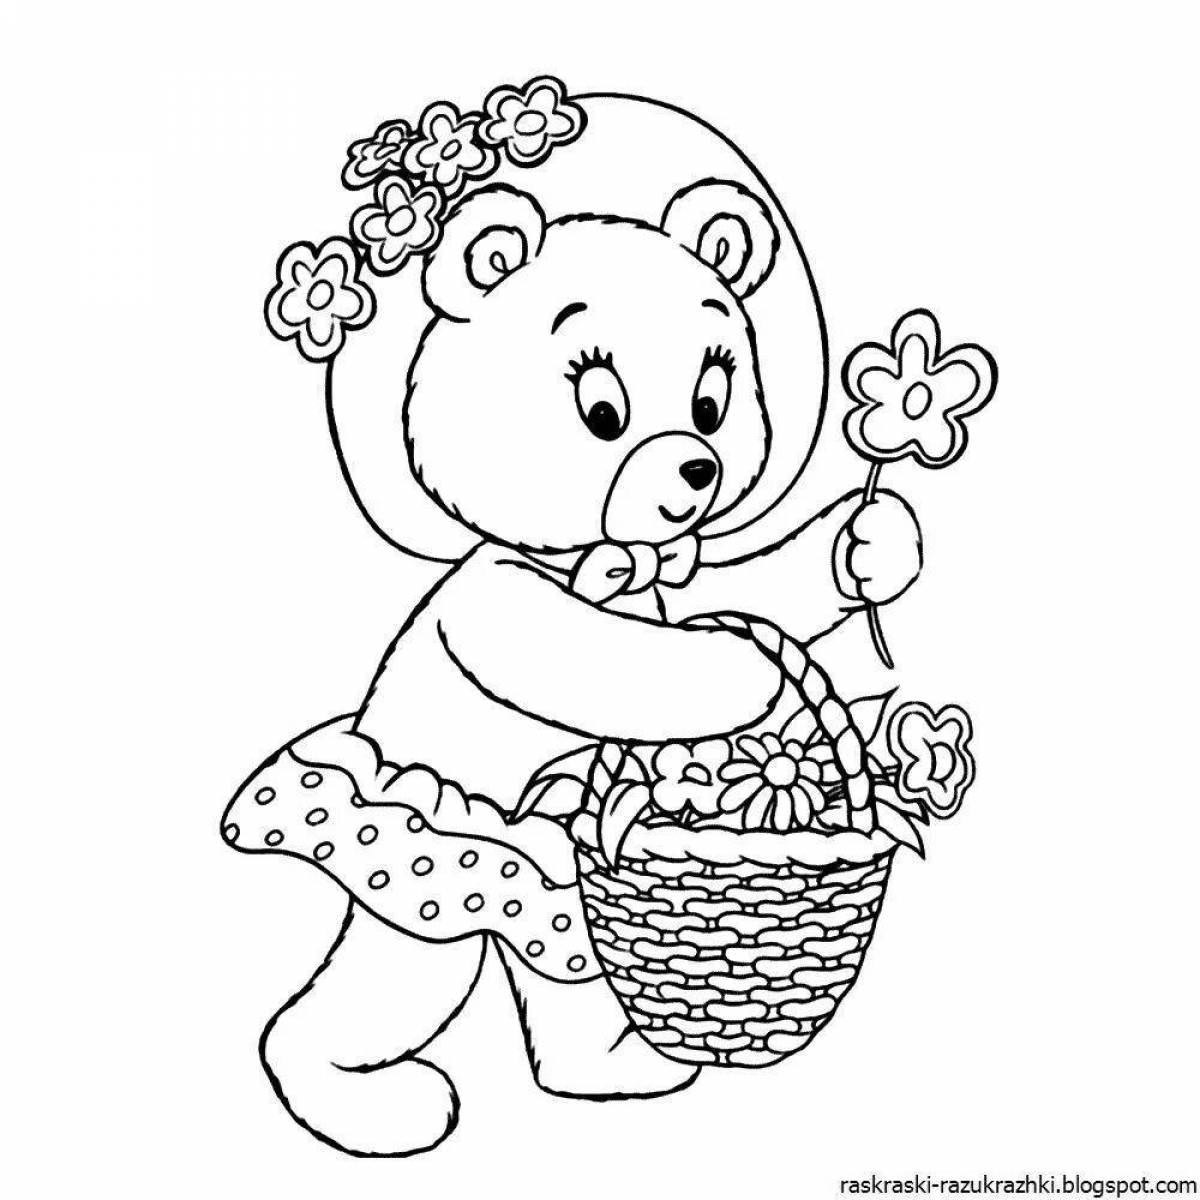 Adorable bear coloring book for girls